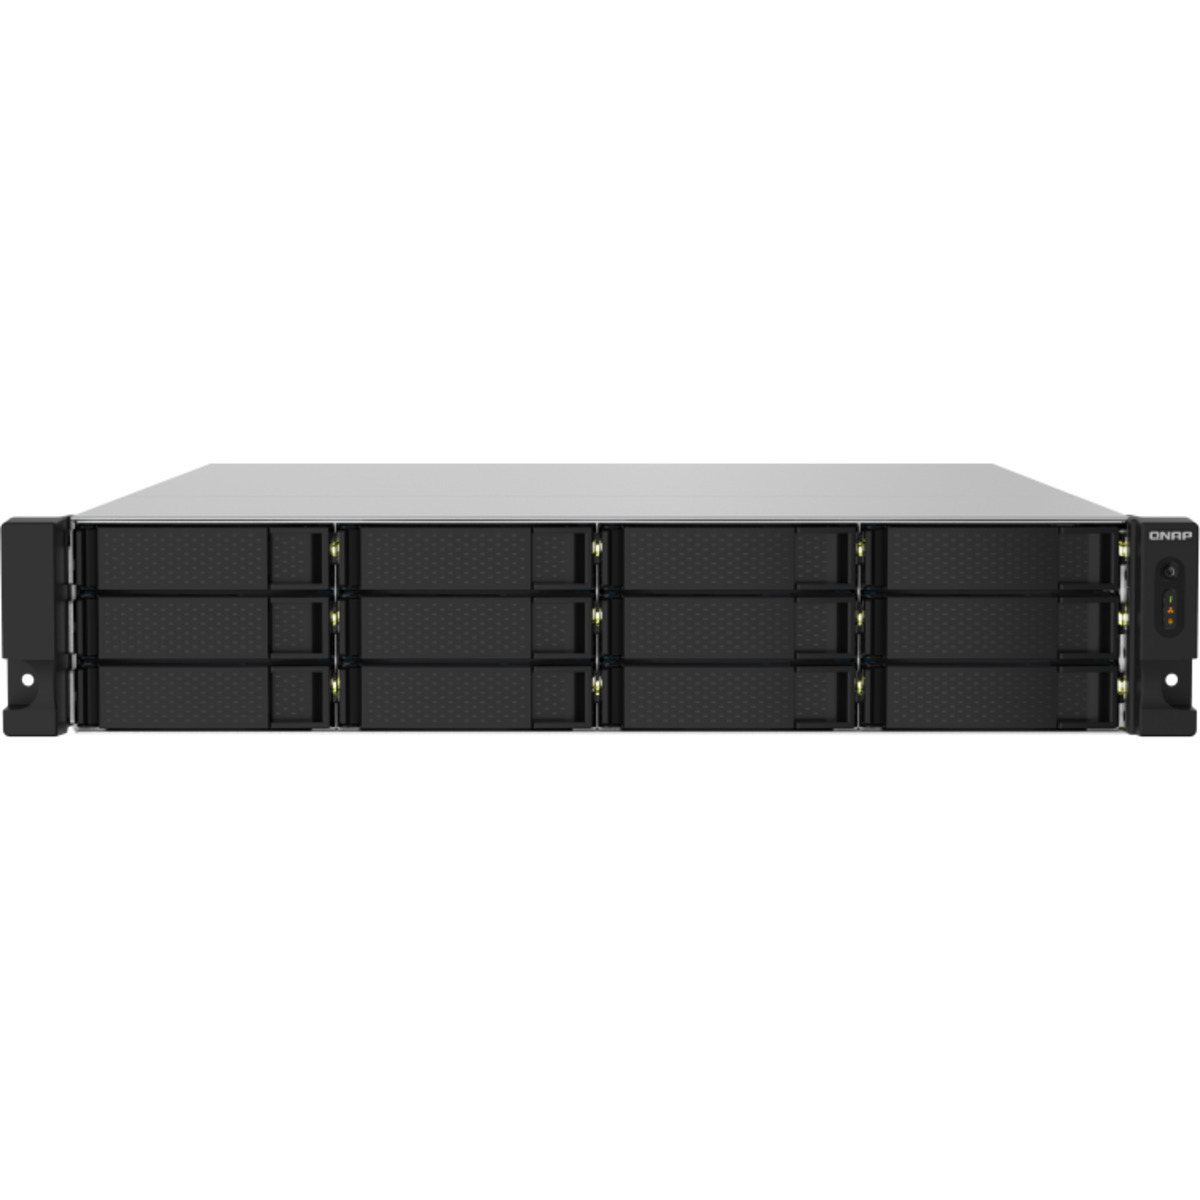 QNAP TS-1232PXU-RP 56tb 12-Bay RackMount Personal / Basic Home / Small Office NAS - Network Attached Storage Device 7x8tb Western Digital Ultrastar DC HC320 HUS728T8TALE6L4 3.5 7200rpm SATA 6Gb/s HDD ENTERPRISE Class Drives Installed - Burn-In Tested - FREE RAM UPGRADE TS-1232PXU-RP